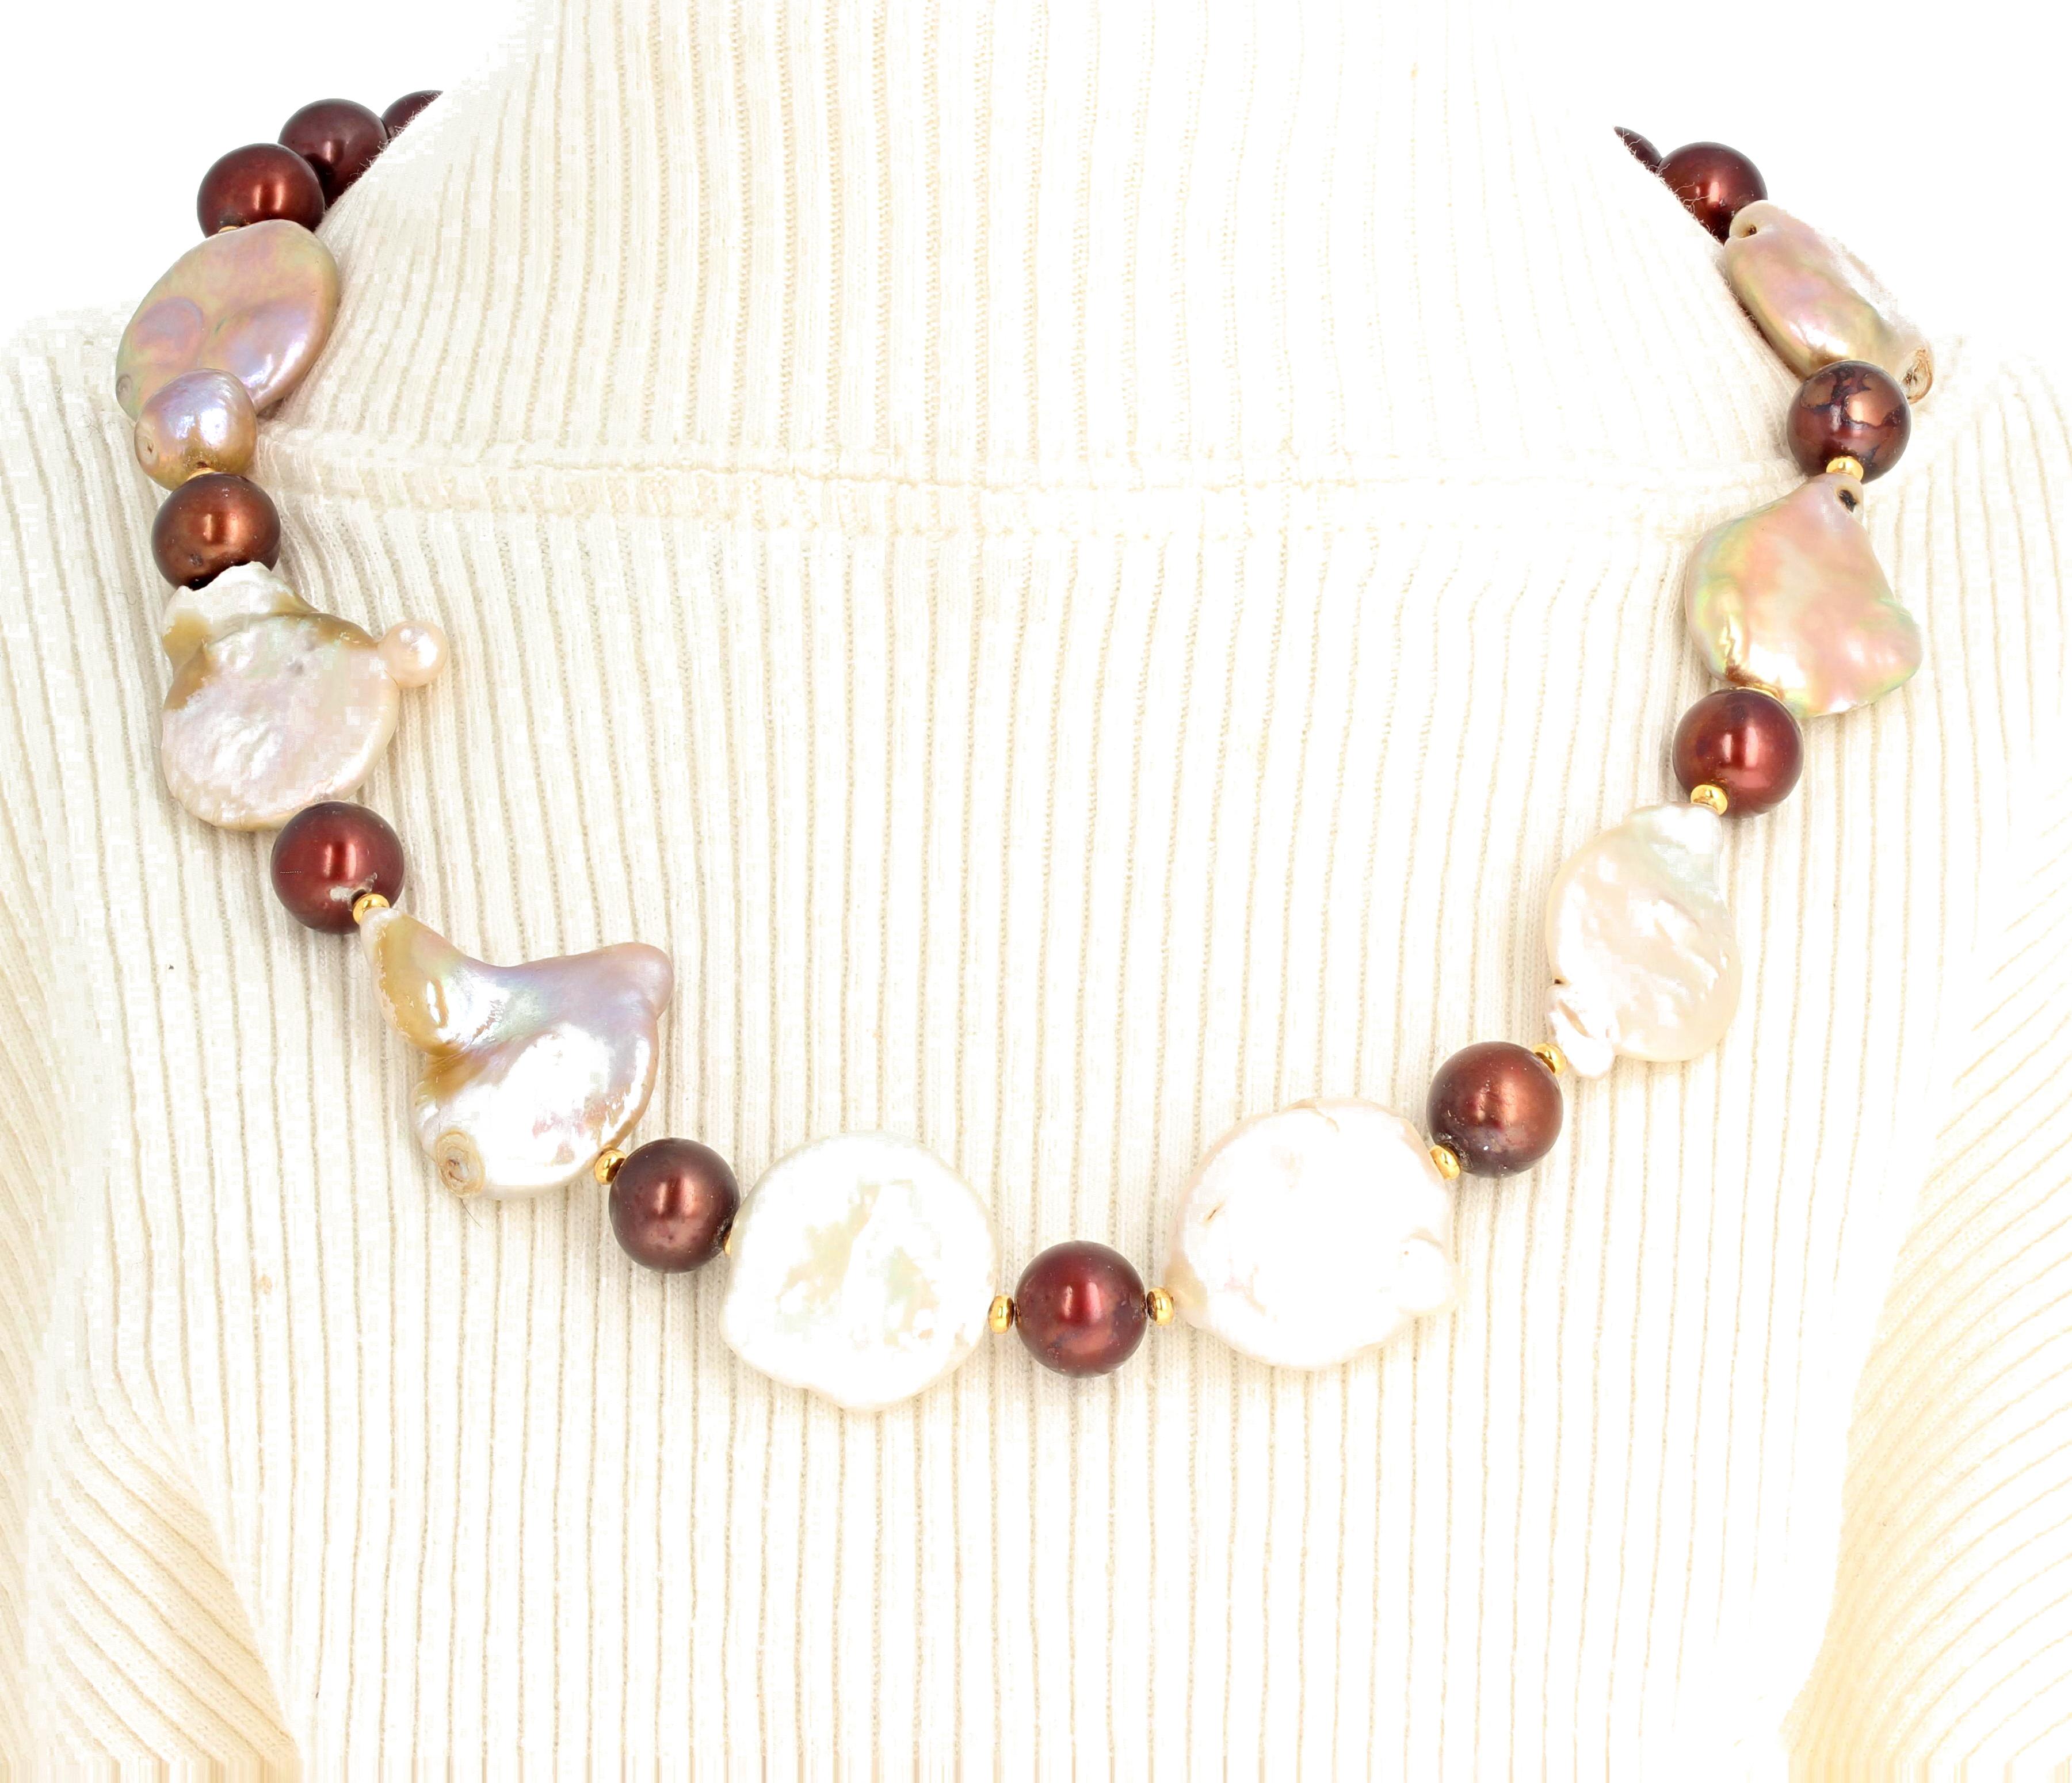 coin pearls necklace